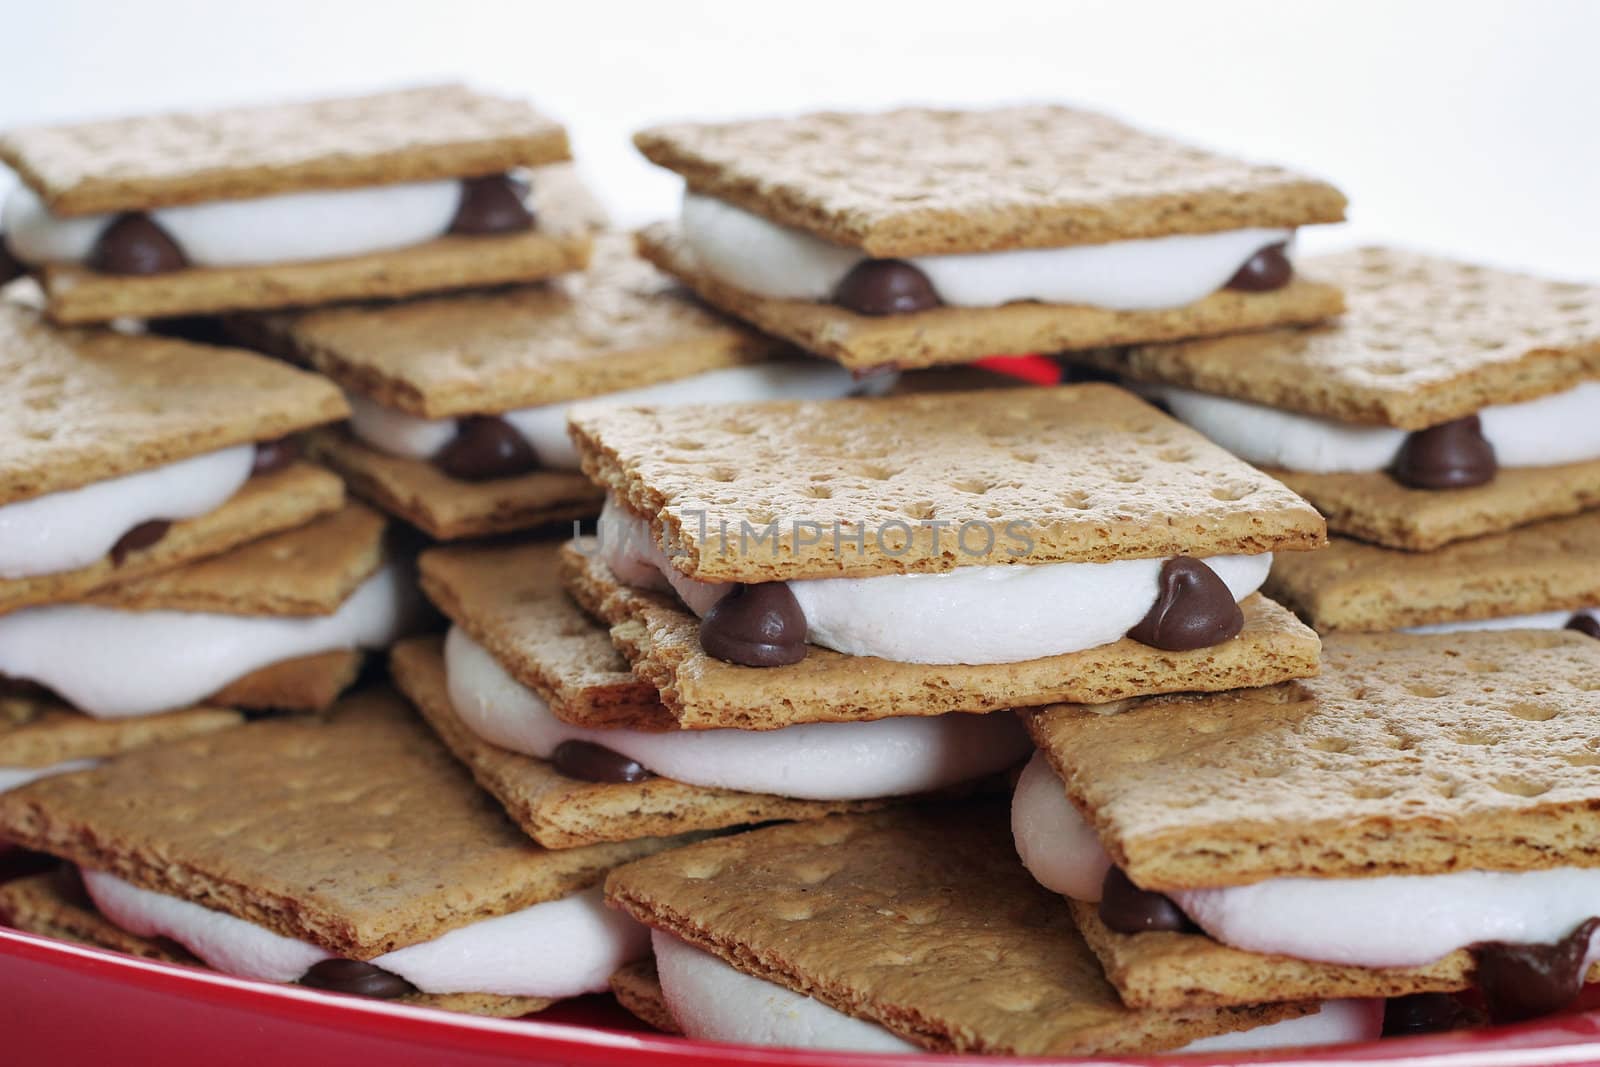 shot of a plate of smores by creativestock